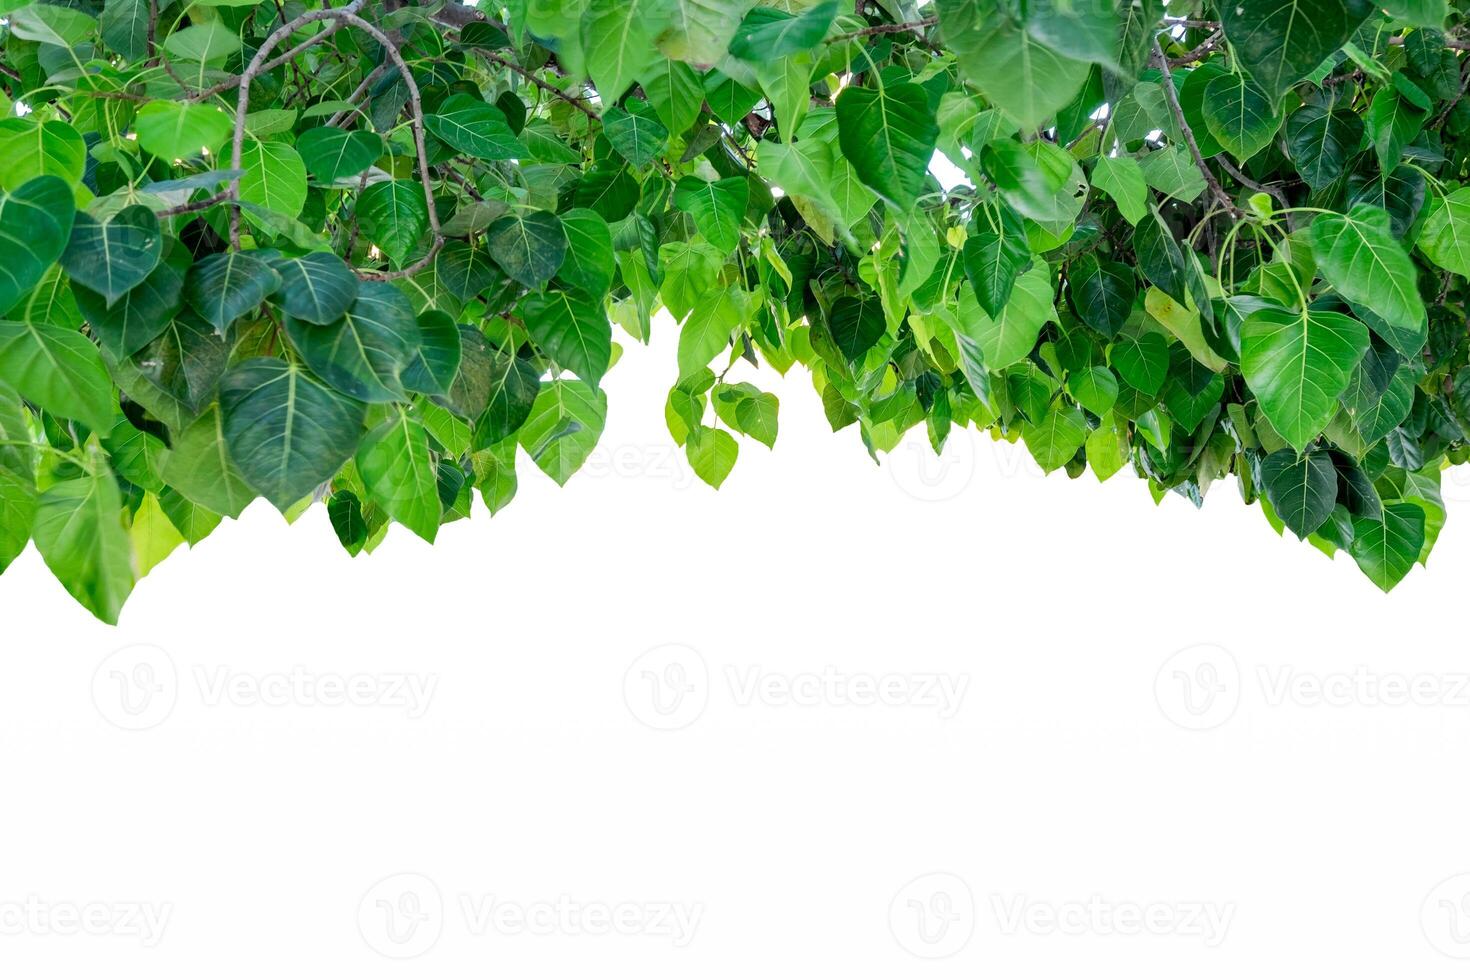 Bodhi tree cover shade on background photo